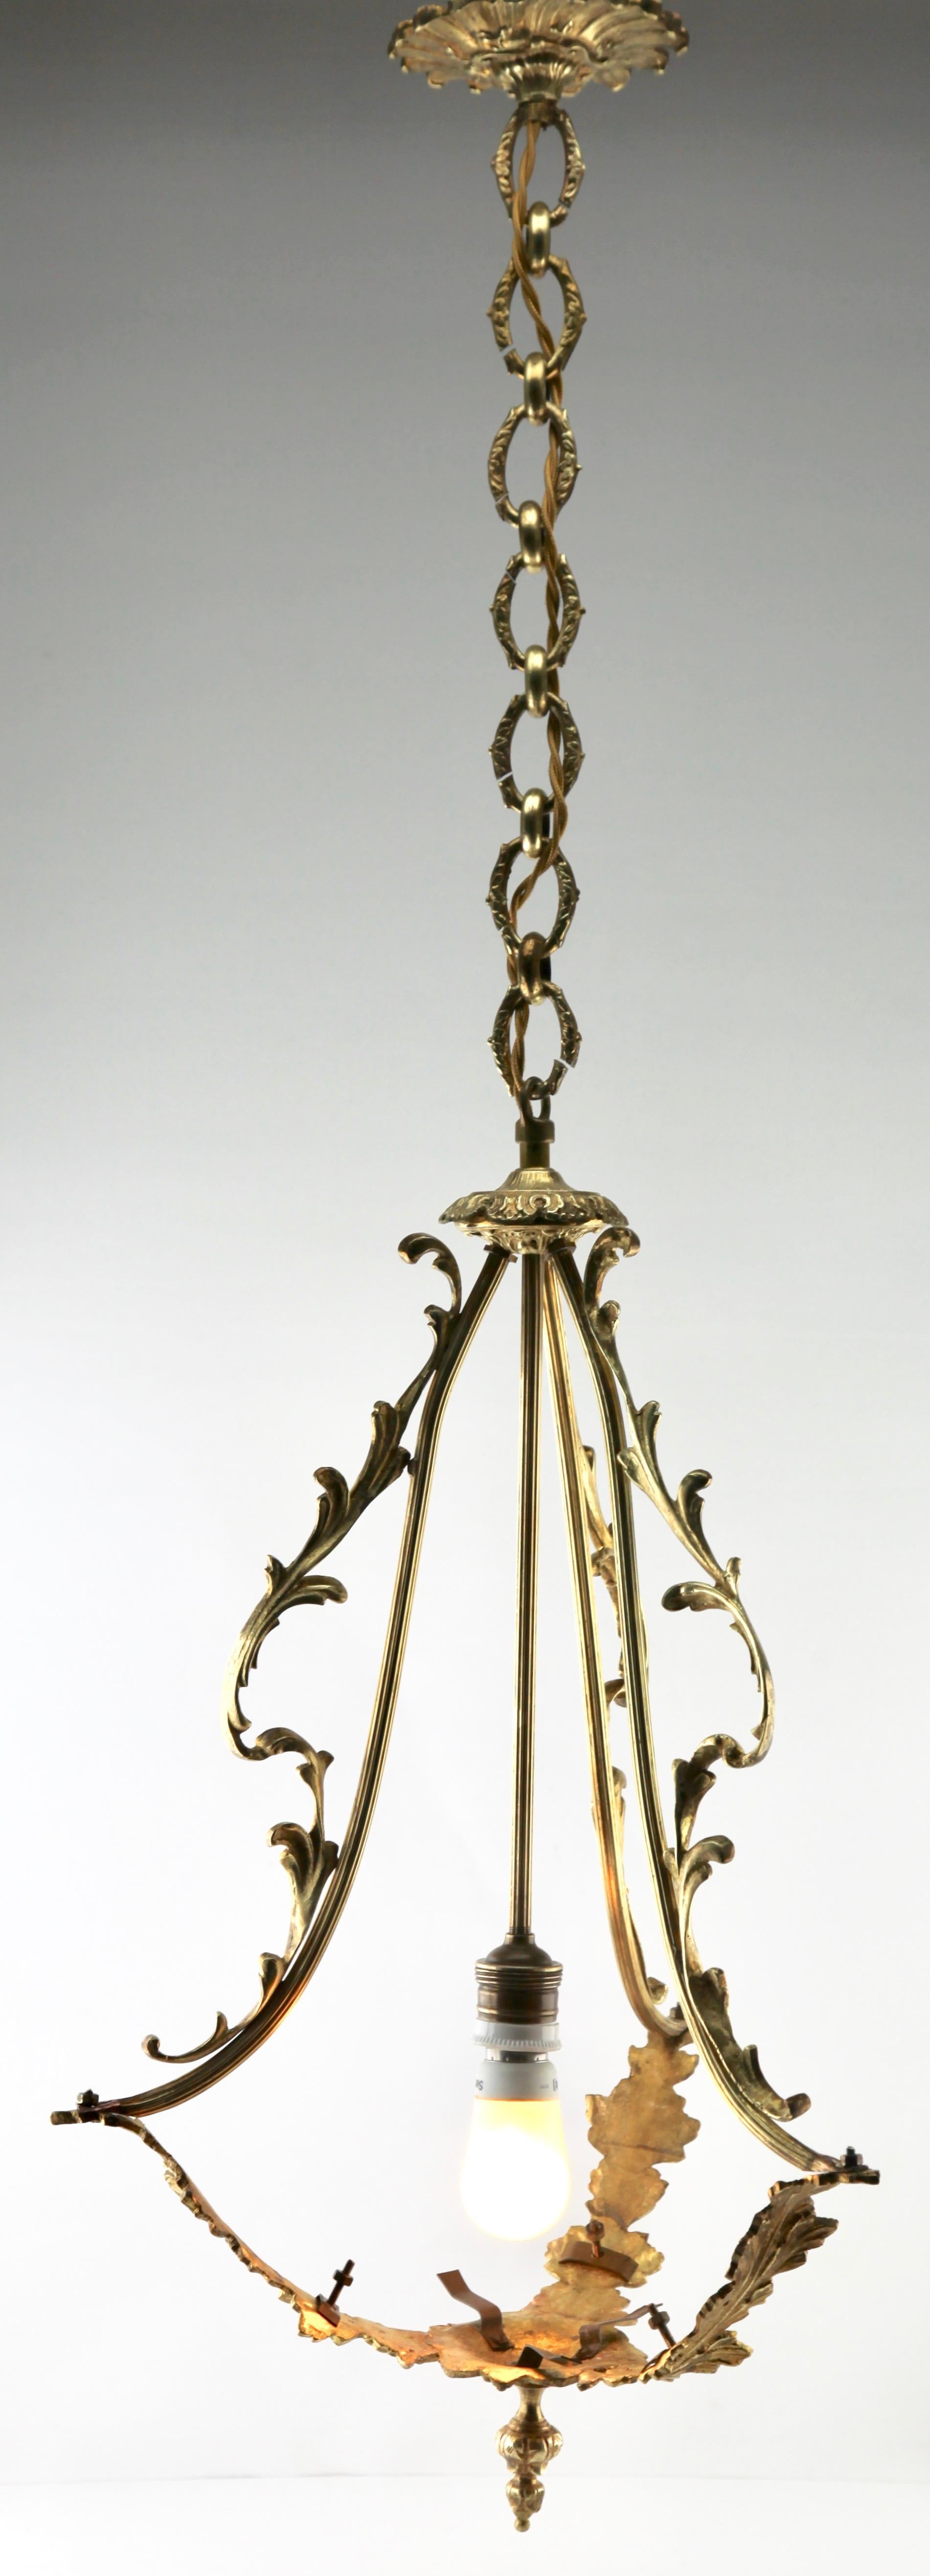 Art Nouveau Central Pendant Lamp Whit Three Clam Shells and Framework of Brass 7